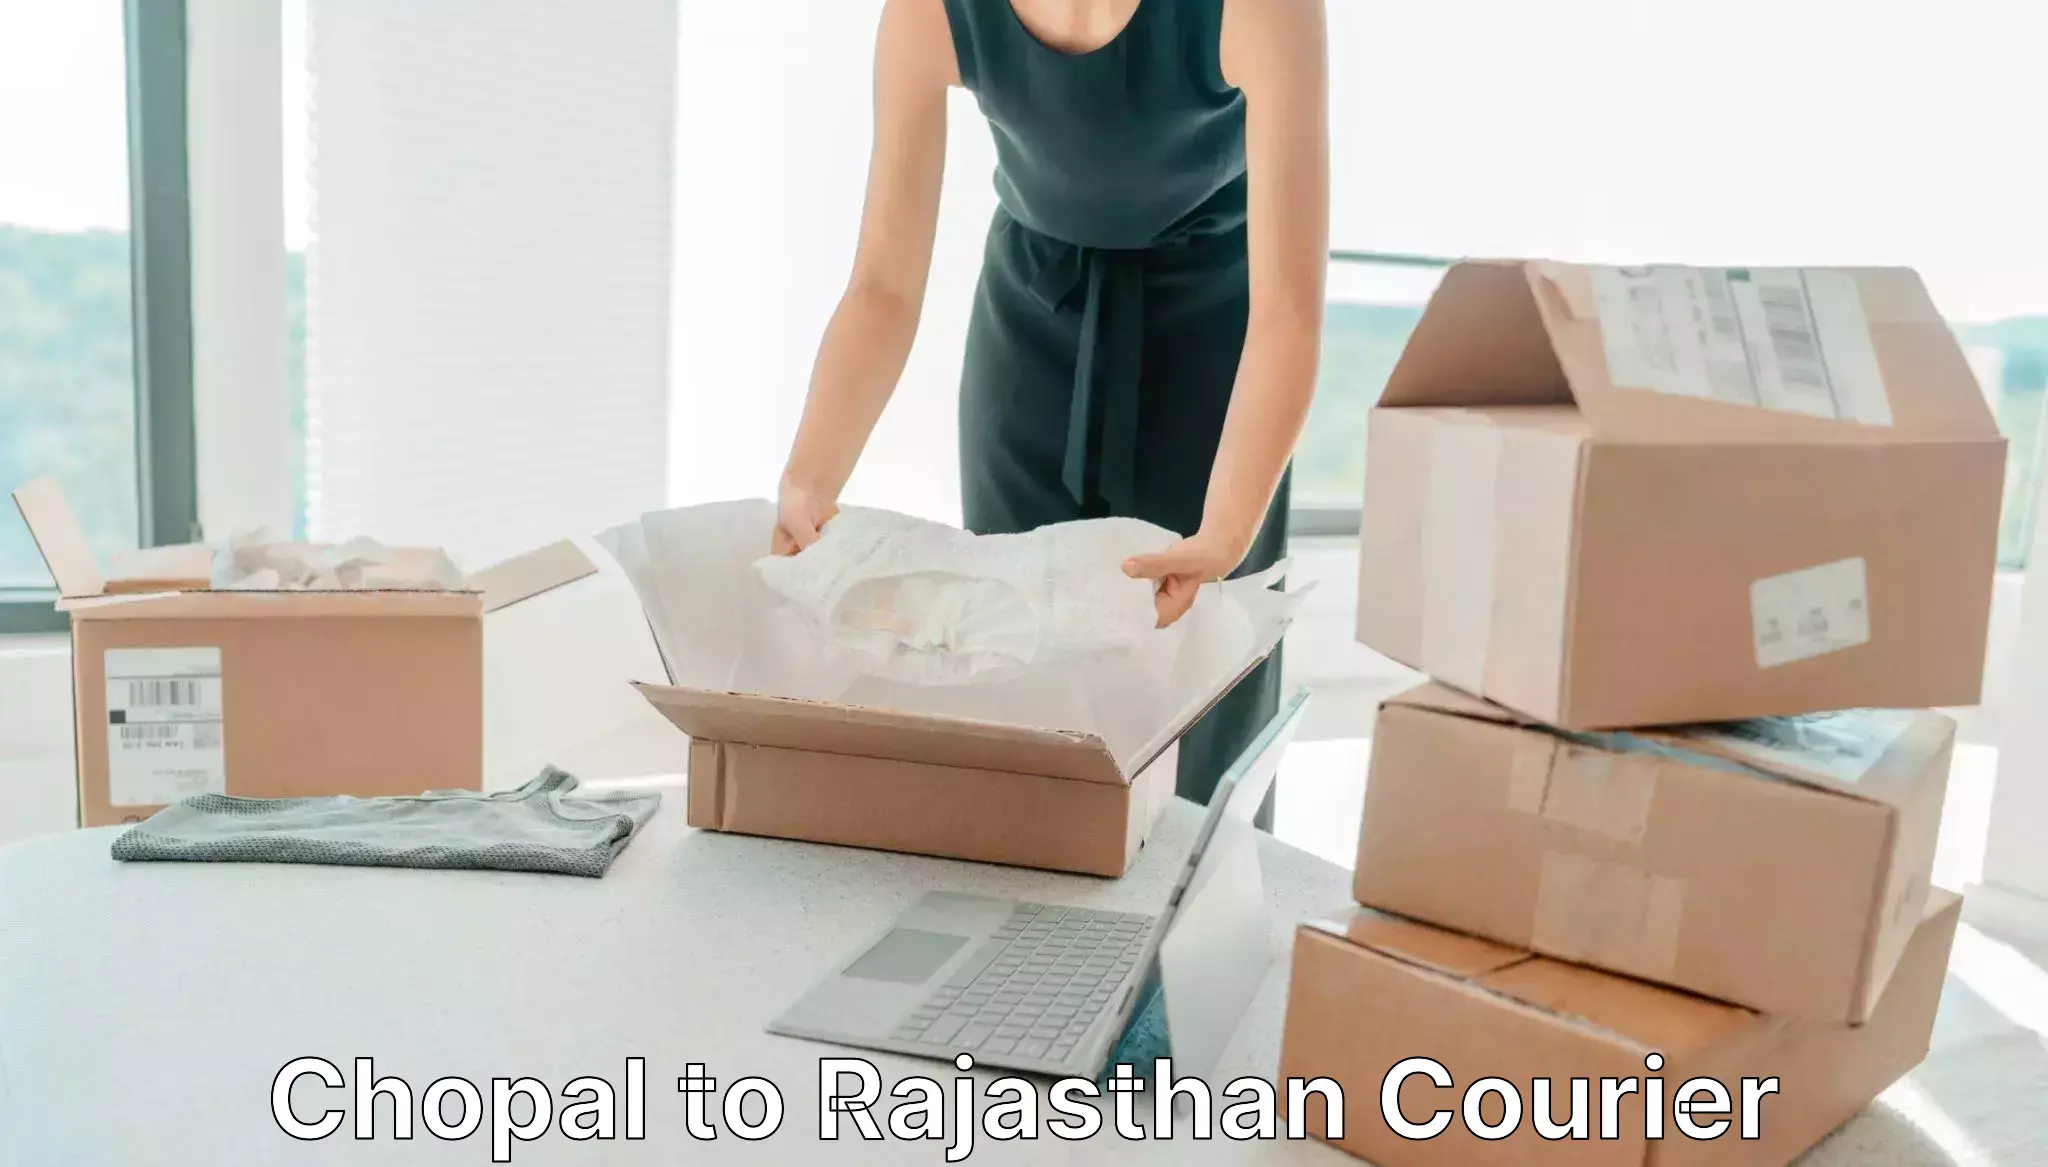 Sustainable delivery practices Chopal to Rajasthan